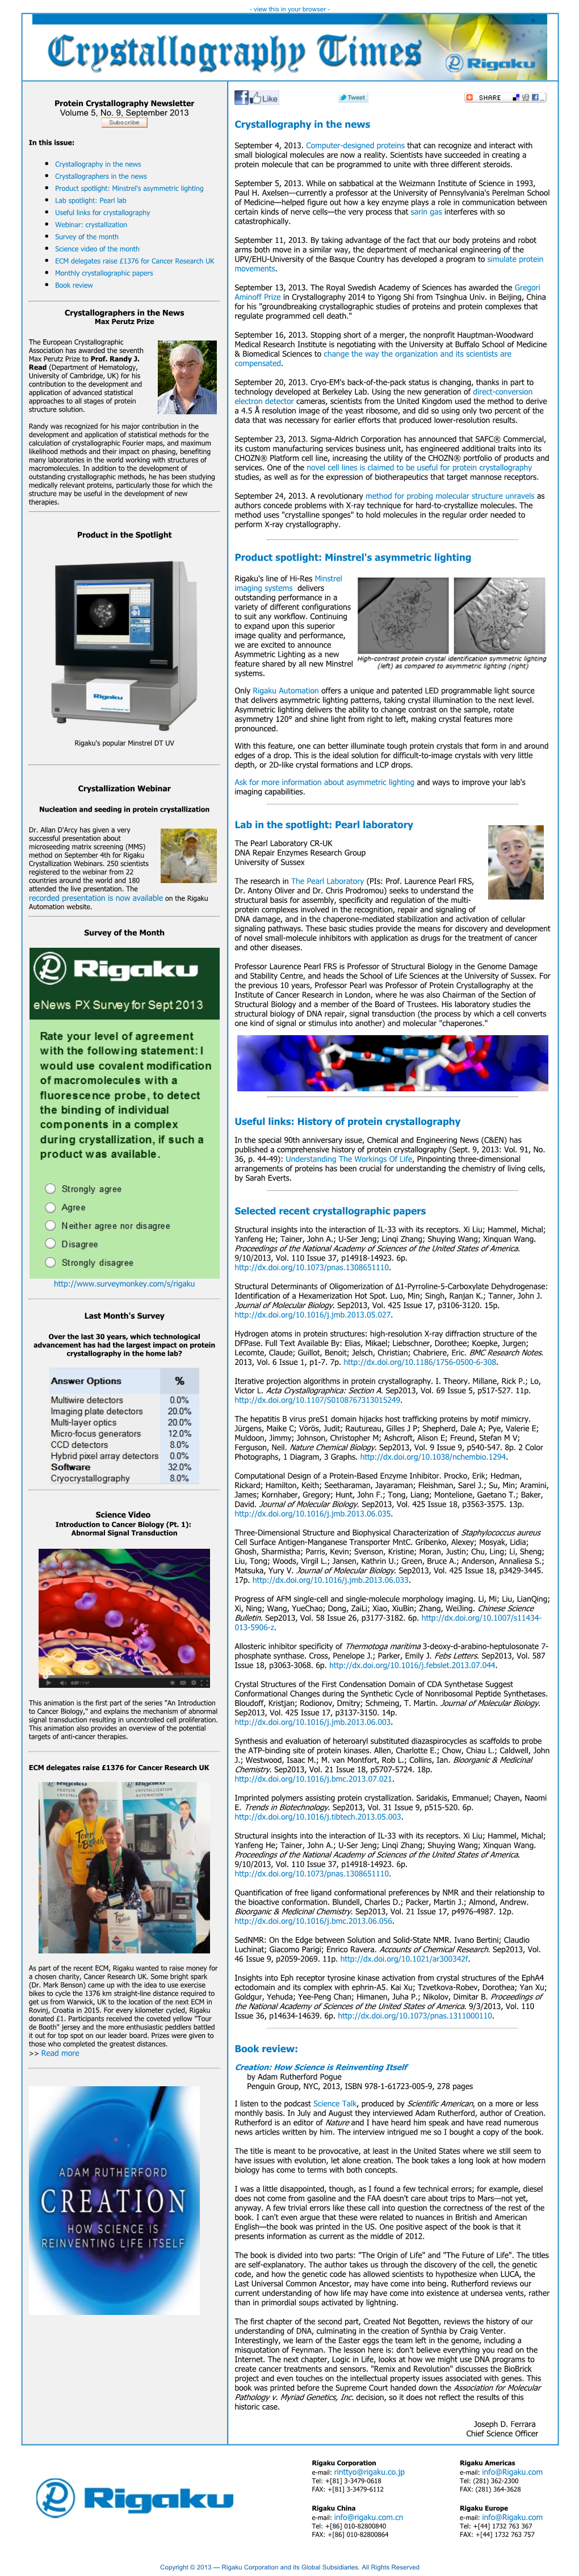 Crystallography in the News Product Spotlight